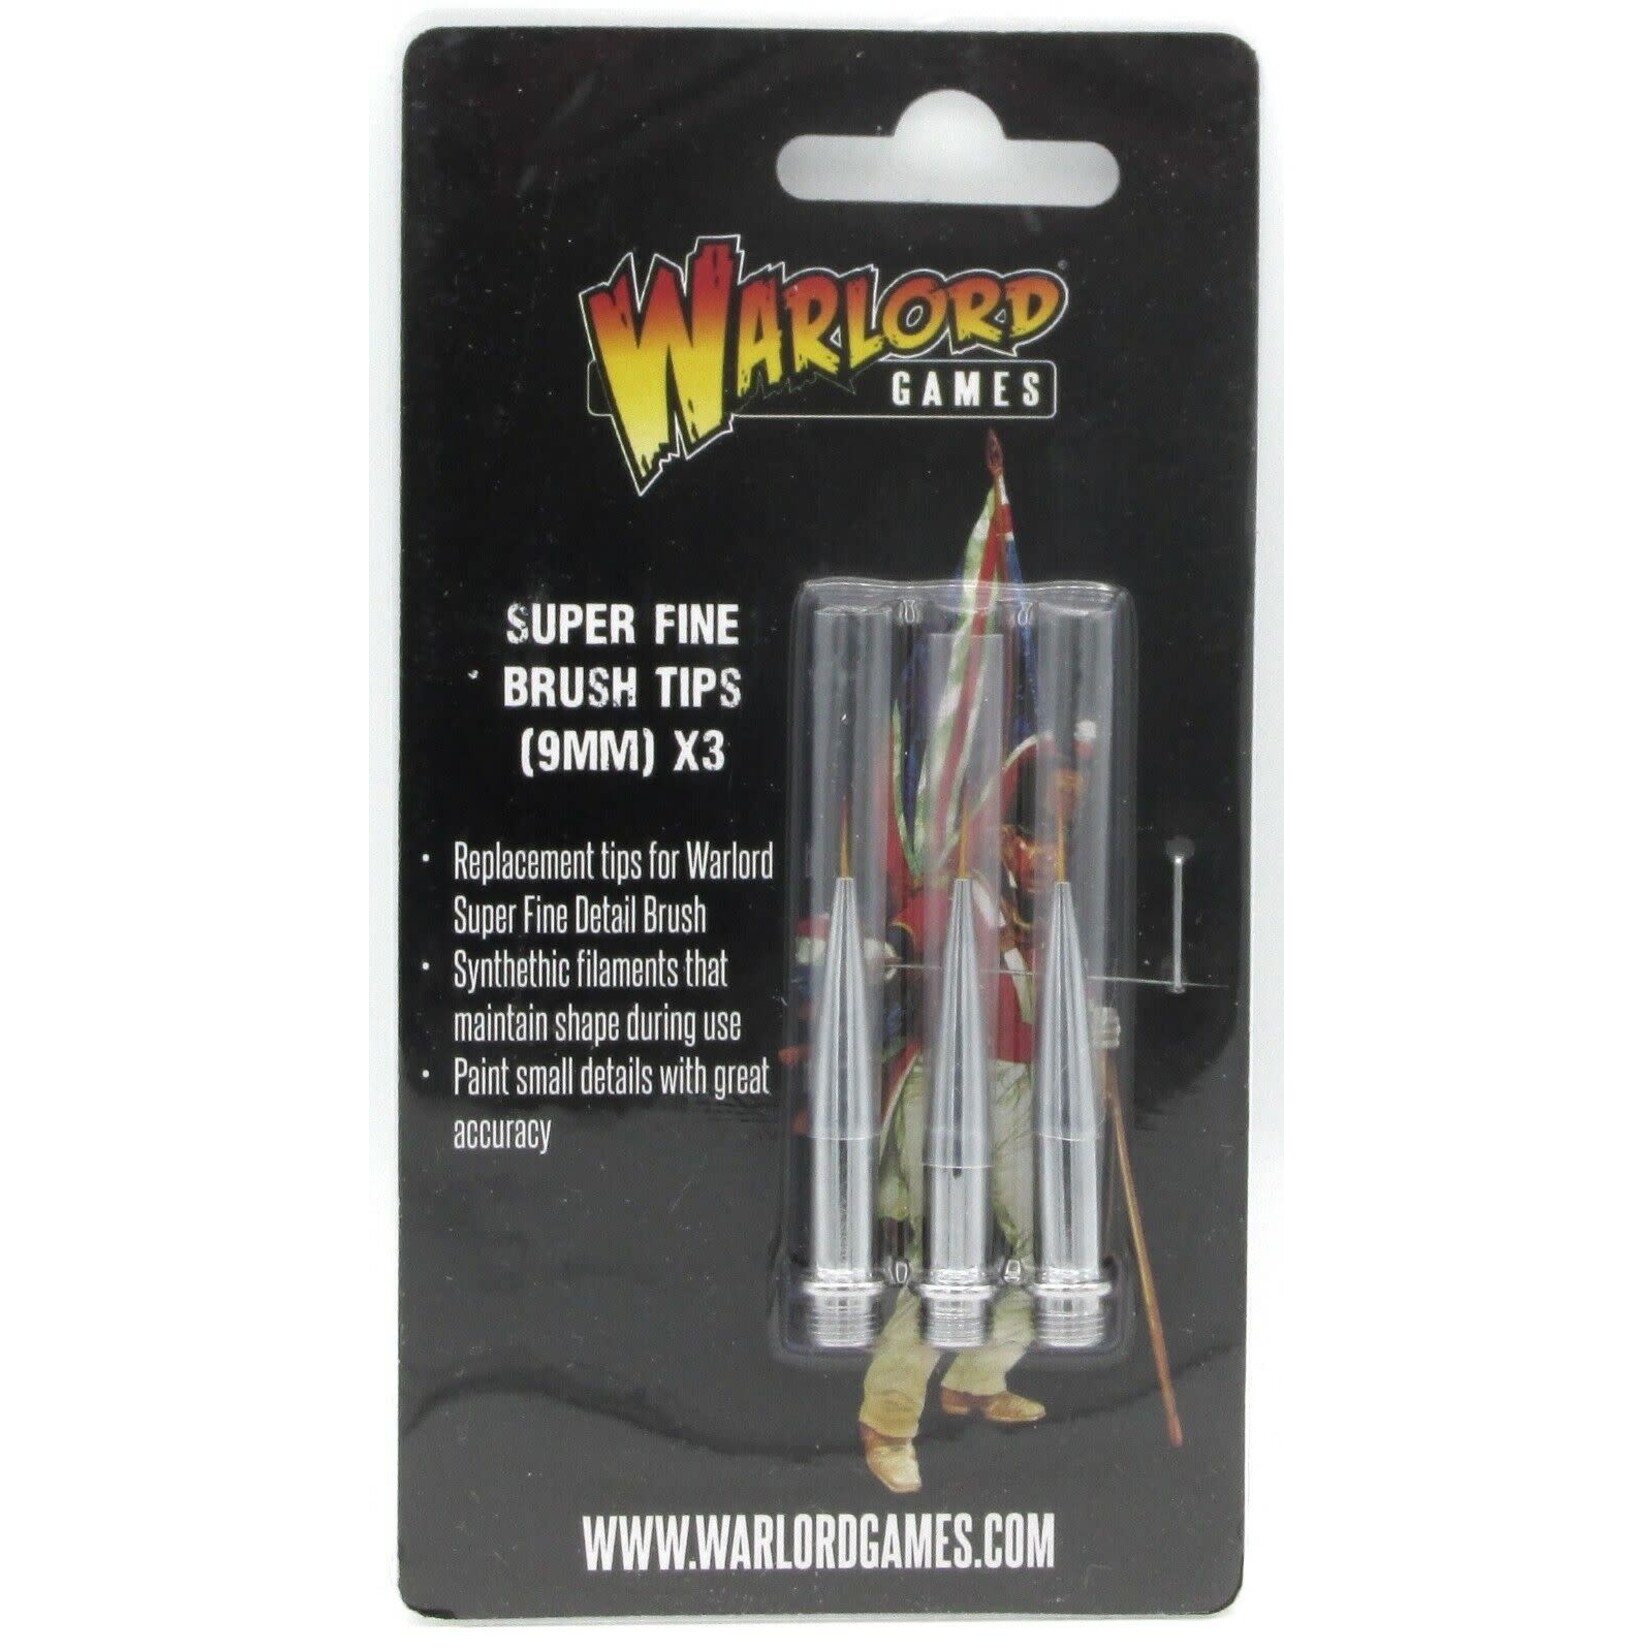 Warlord Games - Super Fine Brush Tips 9mm x3